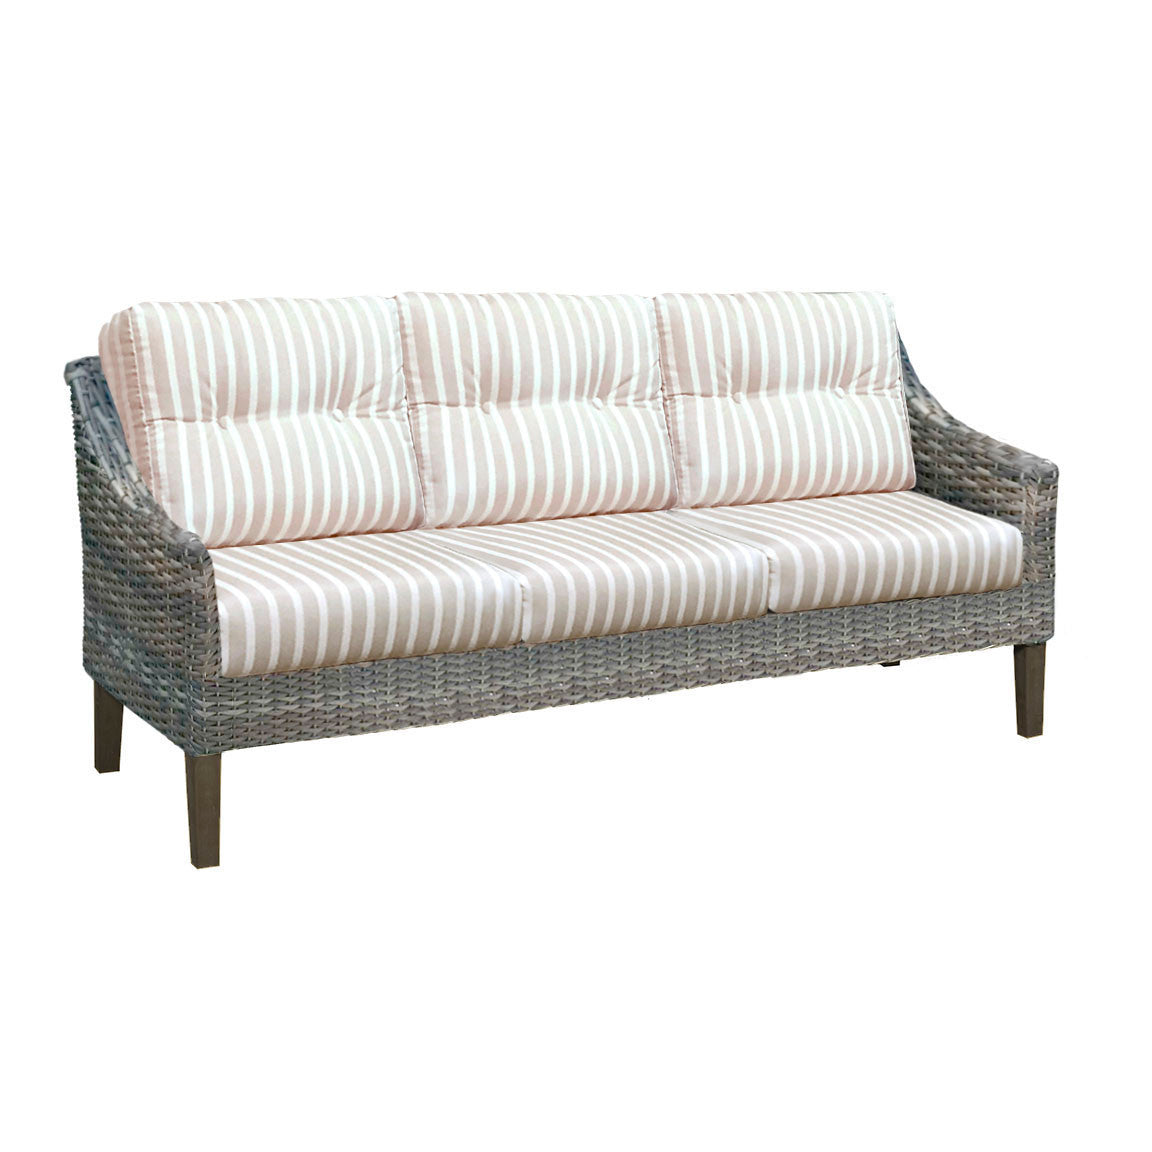 Replacement Cushions for Forever Patio Aberdeen Sofa